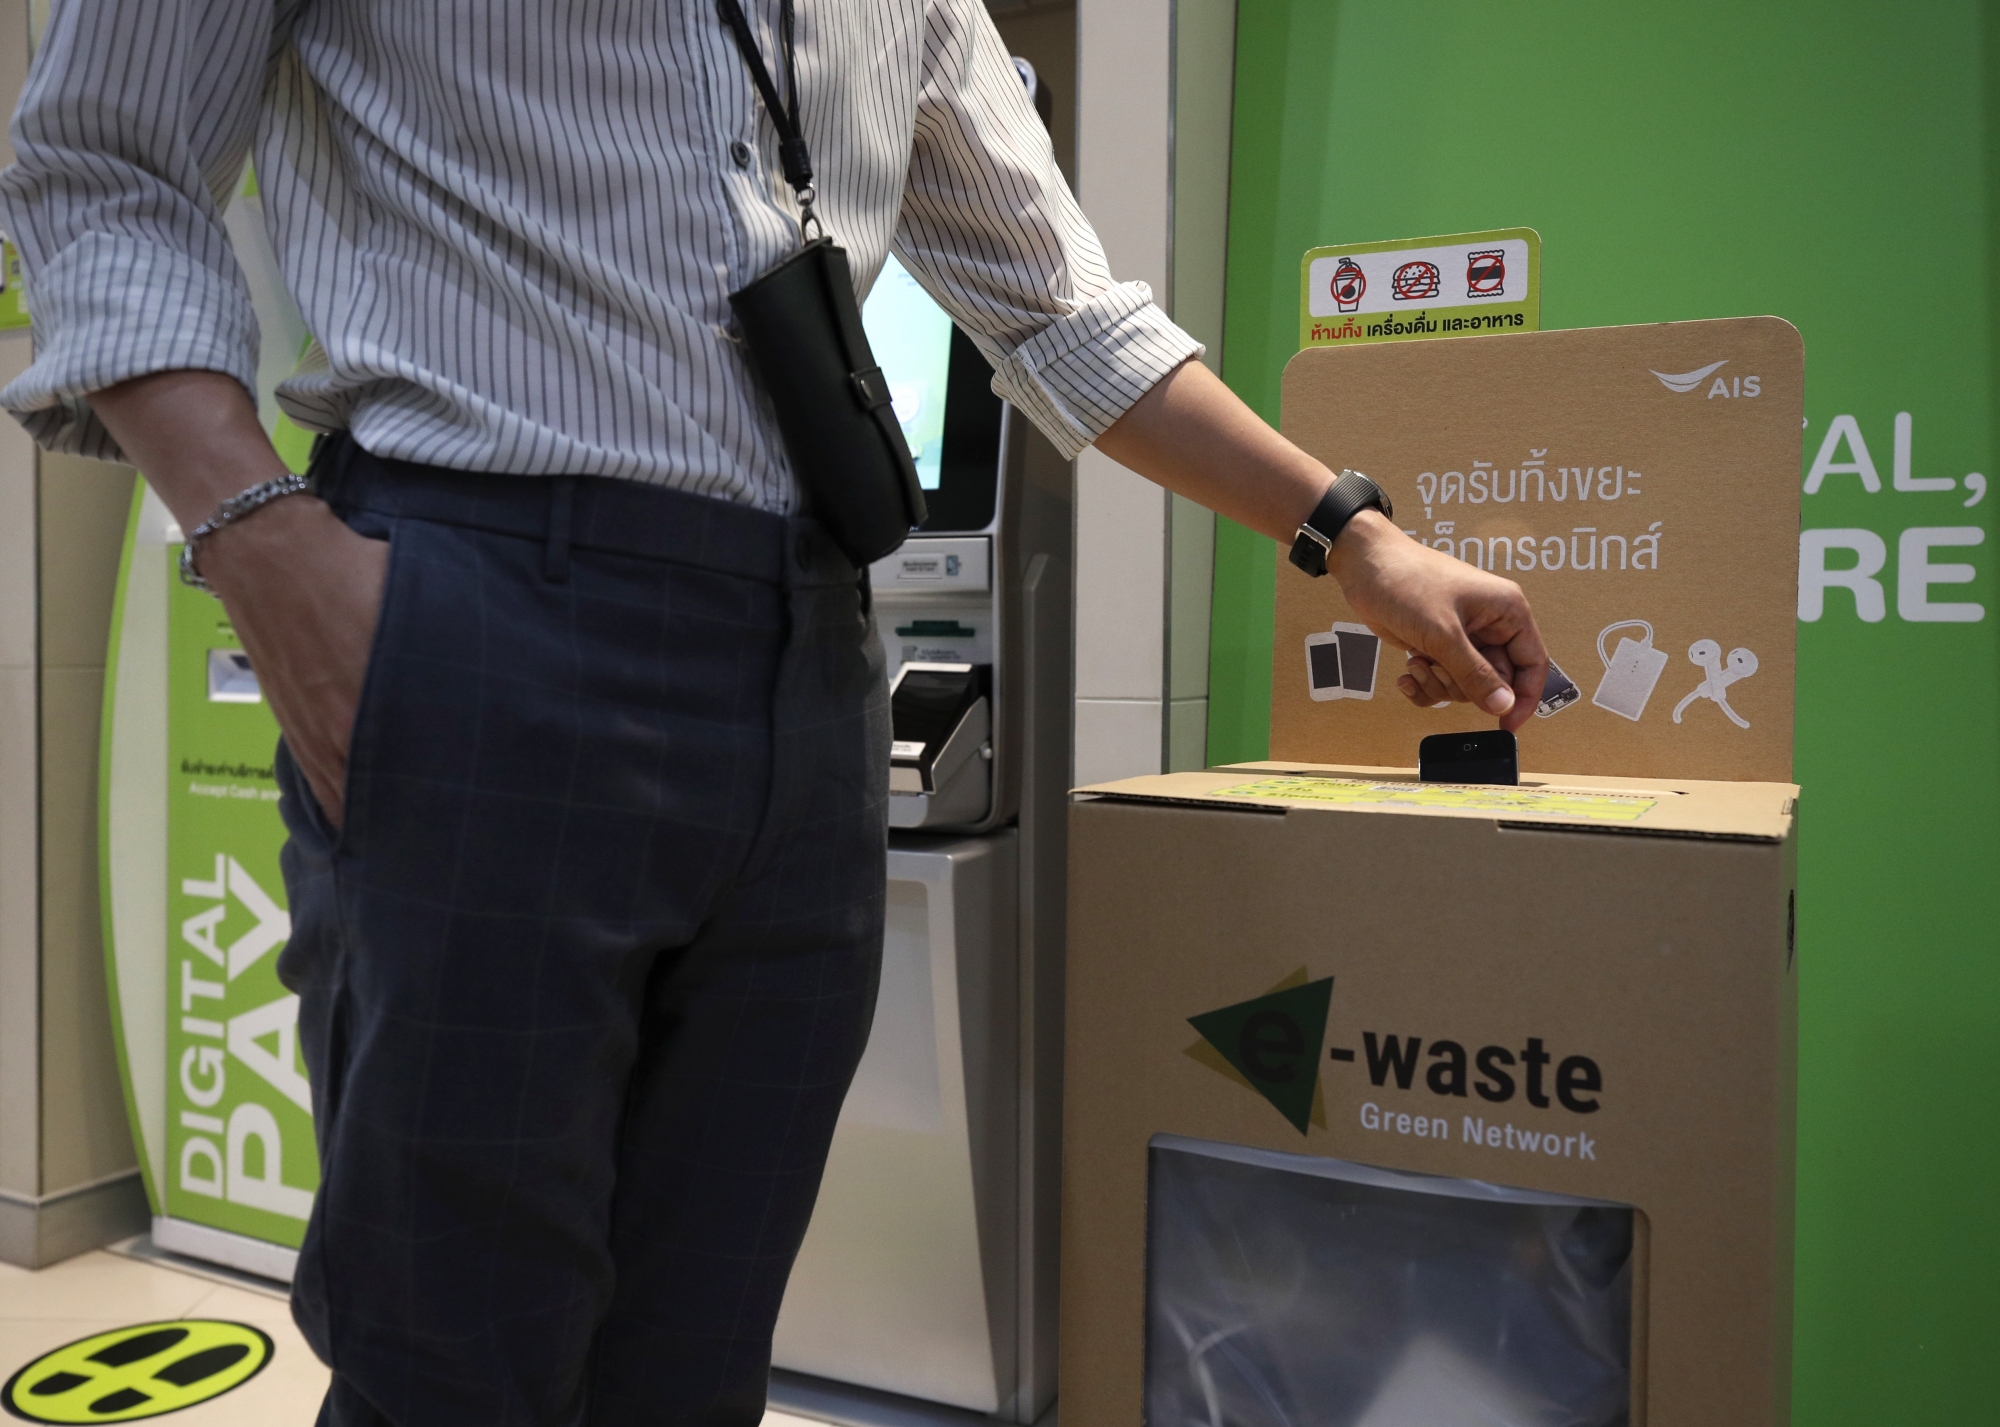 epa08484359 A person drops a mobile phone into an electronic waste disposal bin at an Advanced Info Service (AIS) shop in Bangkok, Thailand, 05 June 2020 (issued 14 June 2020). Thailand's AIS, a mobile phone operator company, launched its electronic wastes disposal campaign by setting up recycled bins across the country and encouraging people to drop off their electronic waste such as broken mobile phones, earphones, adaptors, old tablets, batteries and other e-waste. Thailand has exceeded 400,000 tons of hazardous waste from electronic appliances.  EPA/RUNGROJ YONGRIT
ArcInfo